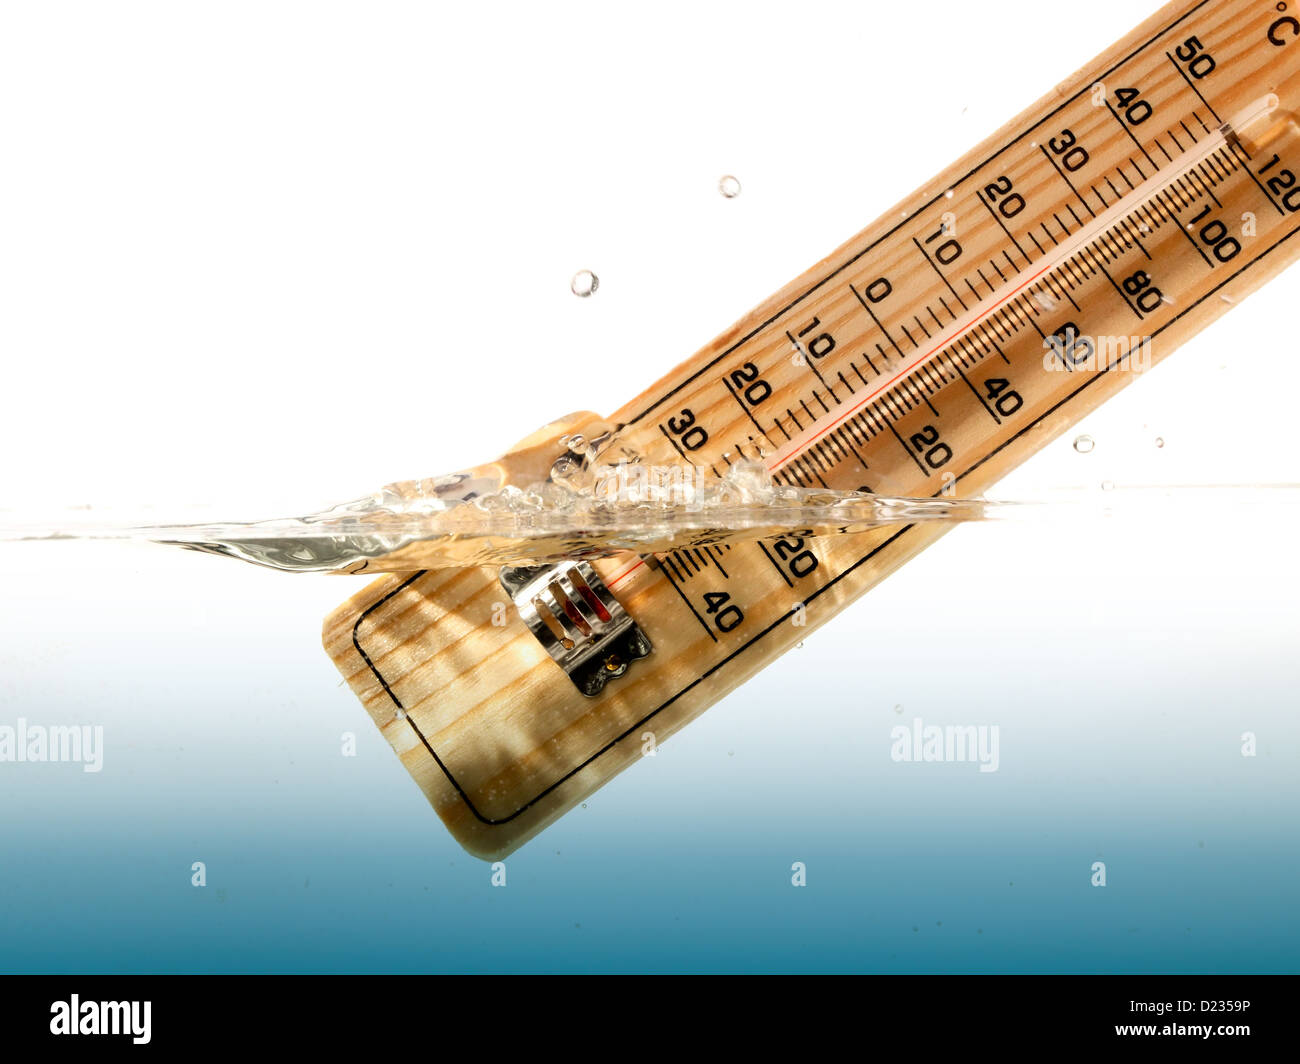 https://c8.alamy.com/comp/D2359P/thermometer-measures-the-temperature-of-the-water-D2359P.jpg